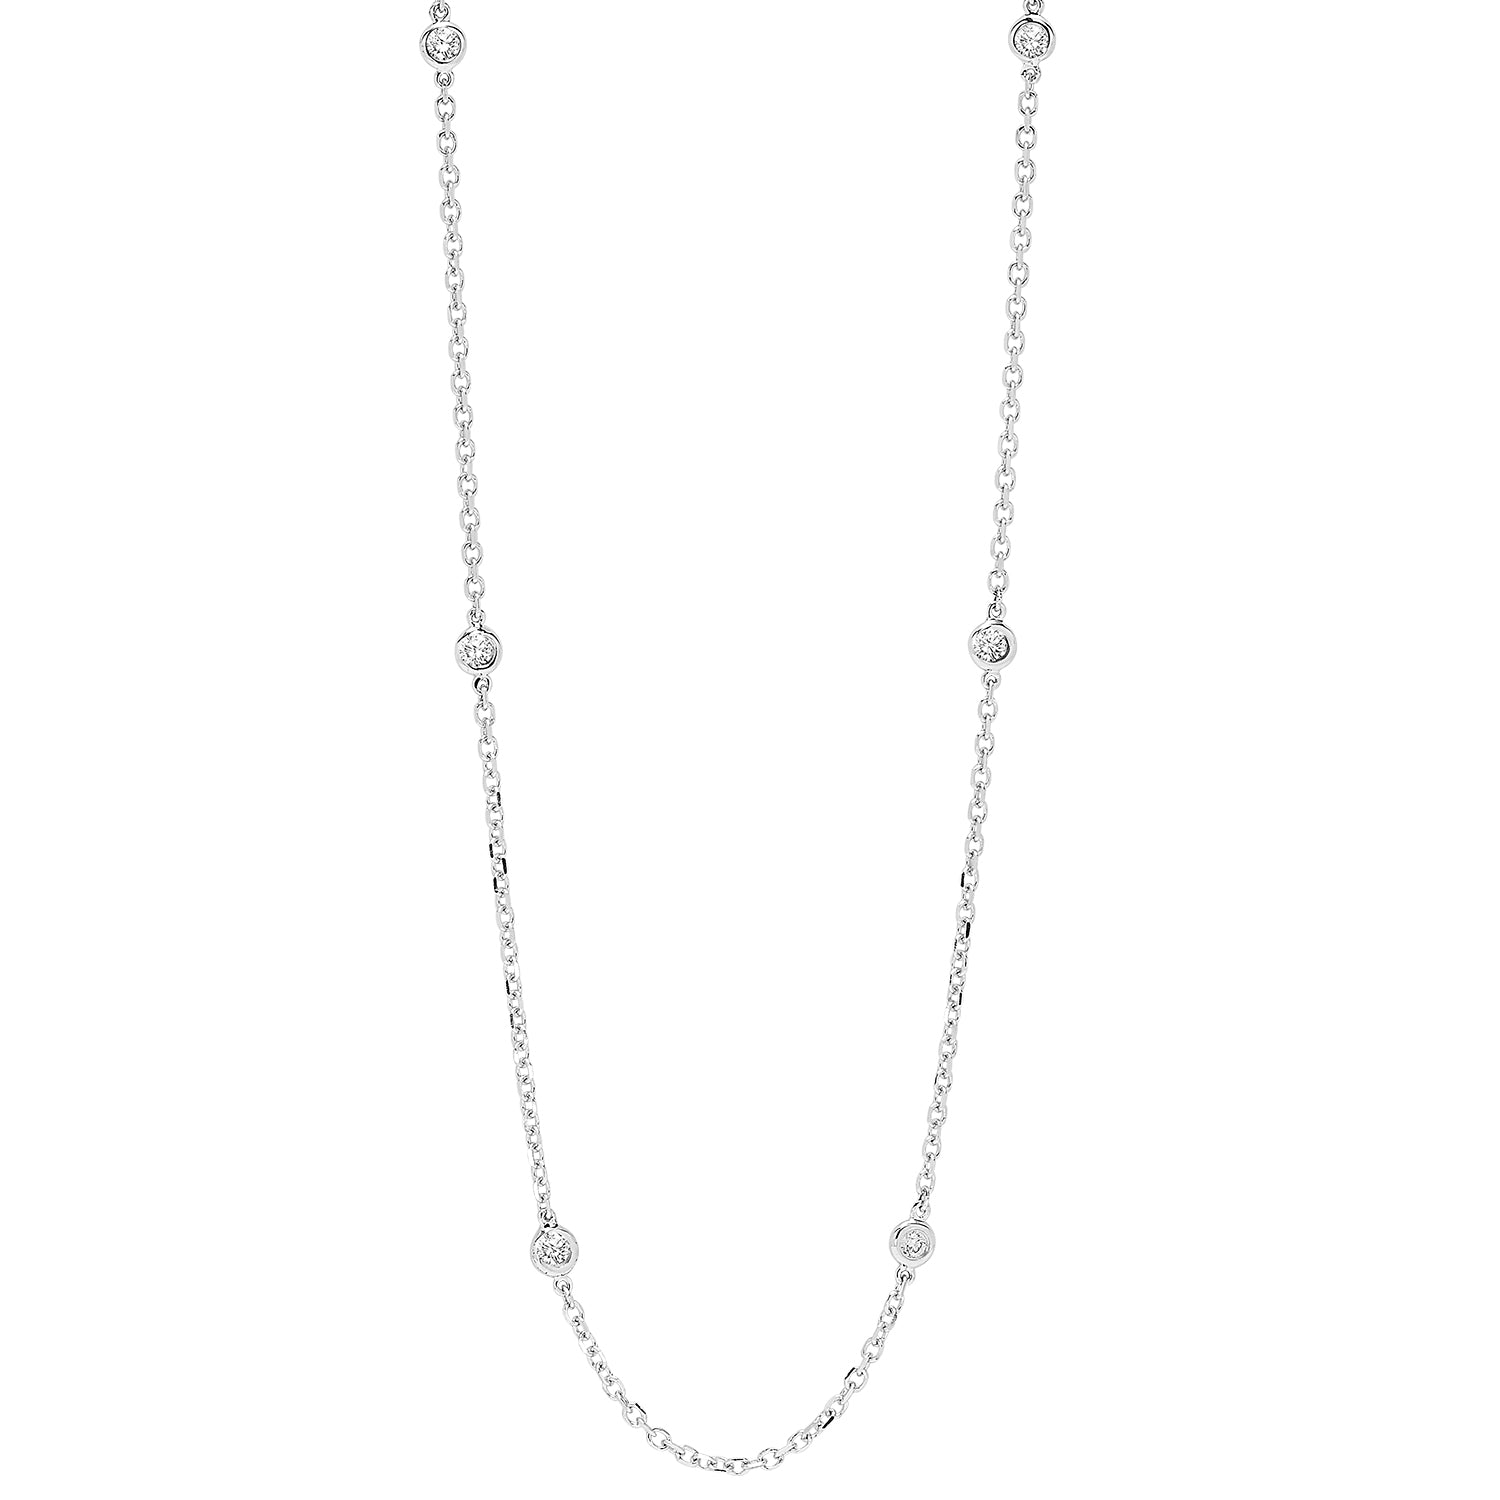 diamond station necklace in 14k white gold (3/4 ctw)